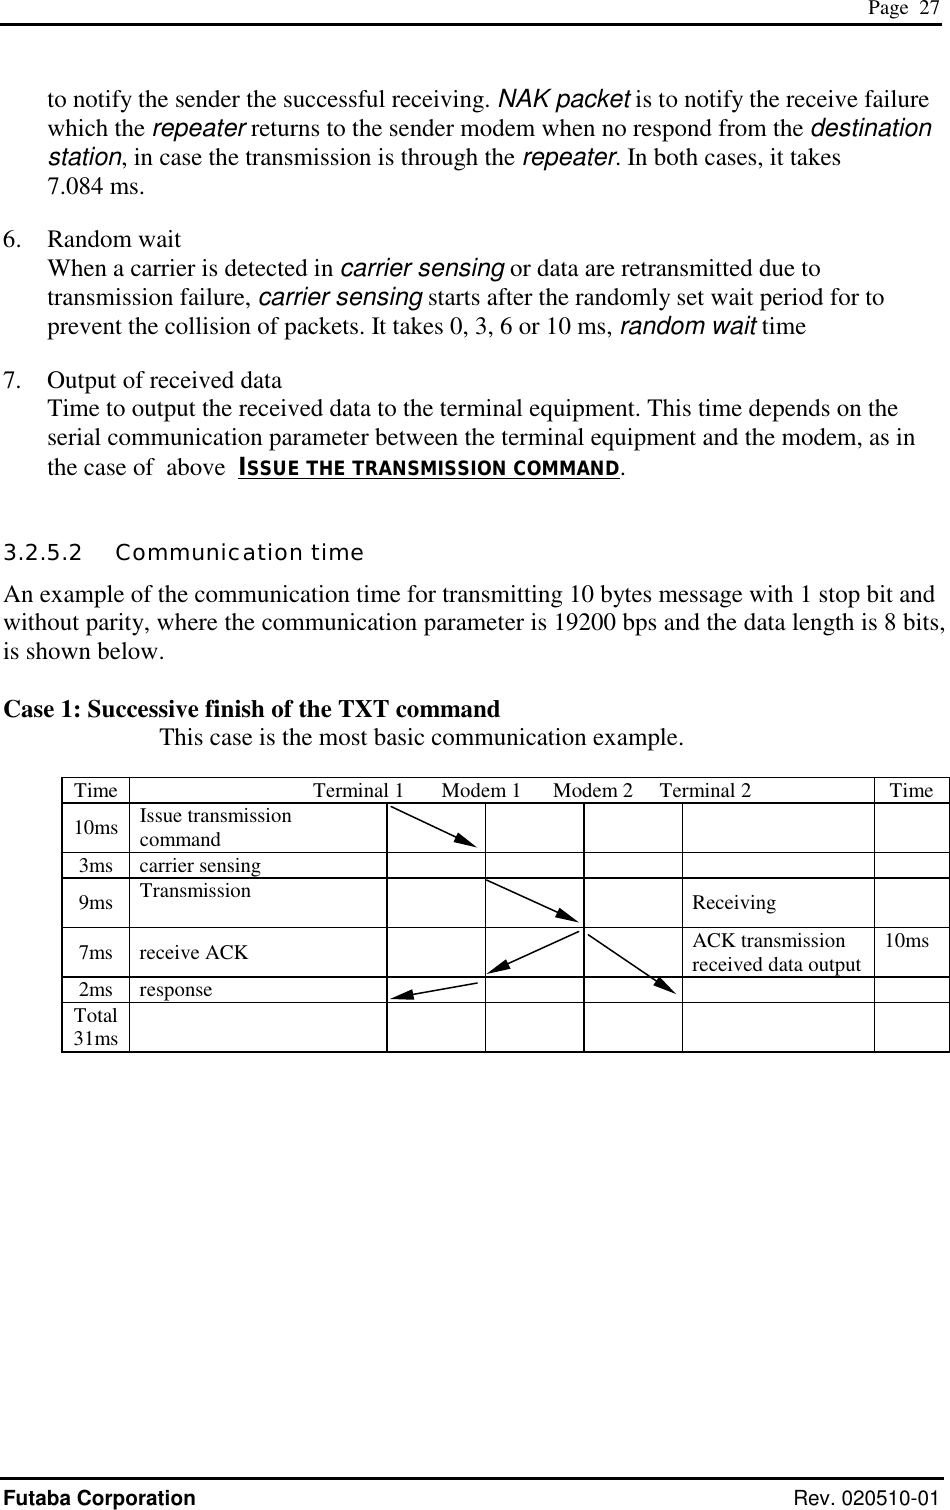  Page  27 Futaba Corporation Rev. 020510-01 to notify the sender the successful receiving. NAK packet is to notify the receive failure which the repeater returns to the sender modem when no respond from the destination station, in case the transmission is through the repeater. In both cases, it takes       7.084 ms. 6.   Random wait When a carrier is detected in carrier sensing or data are retransmitted due to transmission failure, carrier sensing starts after the randomly set wait period for to prevent the collision of packets. It takes 0, 3, 6 or 10 ms, random wait time 7.   Output of received data Time to output the received data to the terminal equipment. This time depends on the serial communication parameter between the terminal equipment and the modem, as in the case of  above  ISSUE THE TRANSMISSION COMMAND. 3.2.5.2   Communication time An example of the communication time for transmitting 10 bytes message with 1 stop bit and without parity, where the communication parameter is 19200 bps and the data length is 8 bits, is shown below.  Case 1: Successive finish of the TXT command       This case is the most basic communication example.      Time                                   Terminal 1       Modem 1      Modem 2     Terminal 2  Time 10ms  Issue transmission command        3ms carrier sensing        9ms  Transmission     Receiving    7ms receive ACK     ACK transmission received data output  10ms 2ms response        Total 31ms                